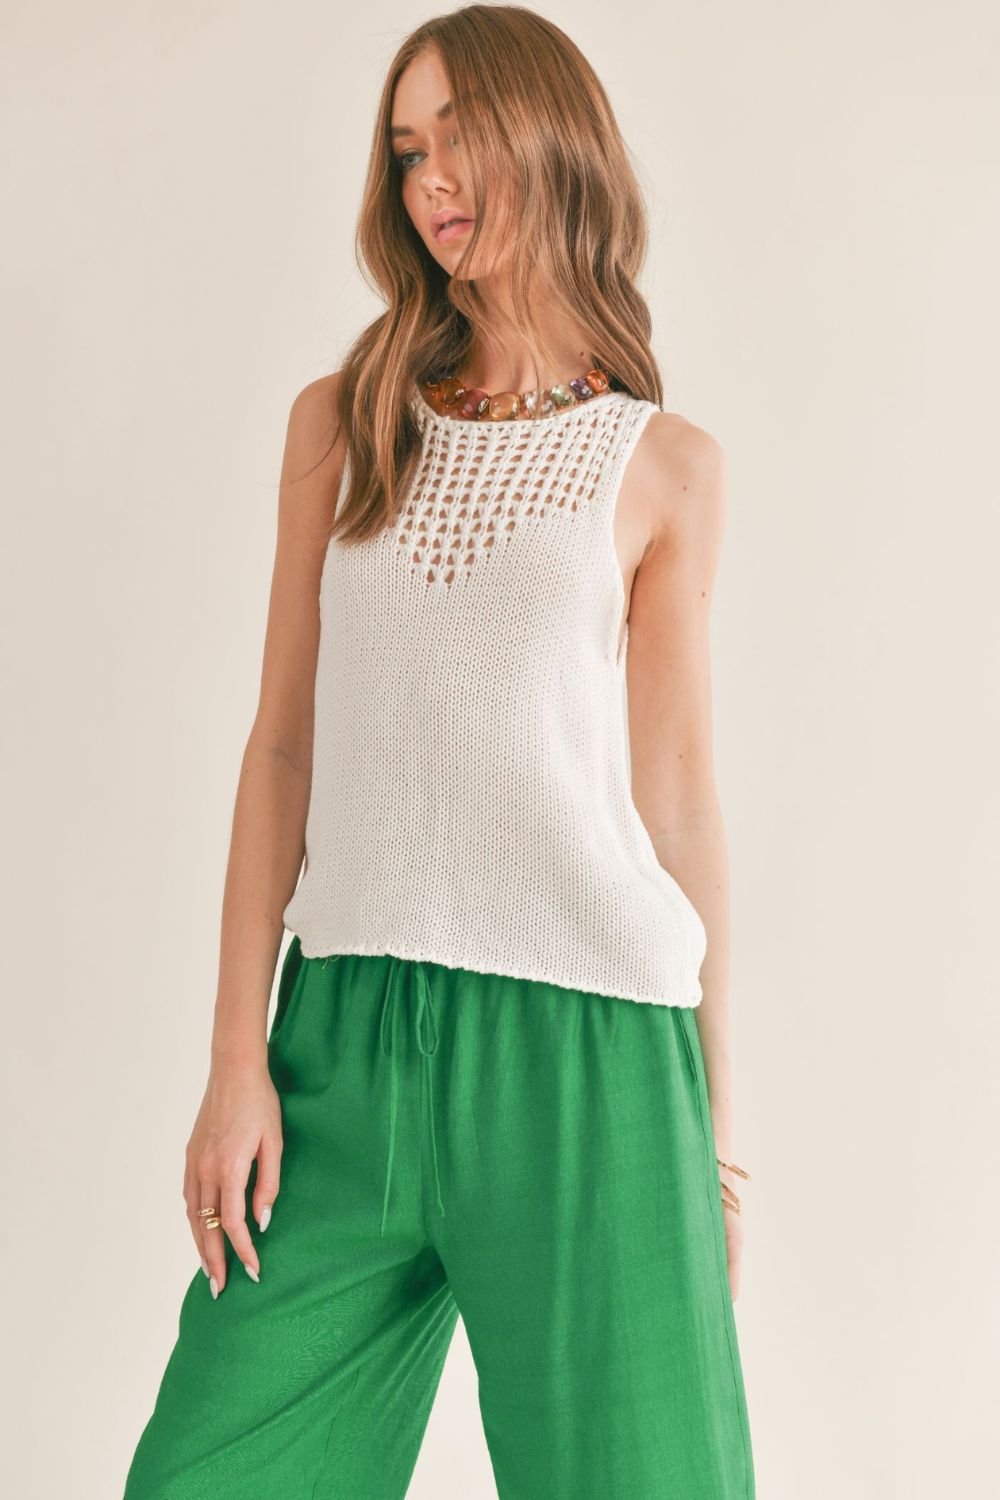 Women's Breeze Open Knit Neck Sweater Tank Top | Ivory - Women's Shirts & Tops - Blooming Daily